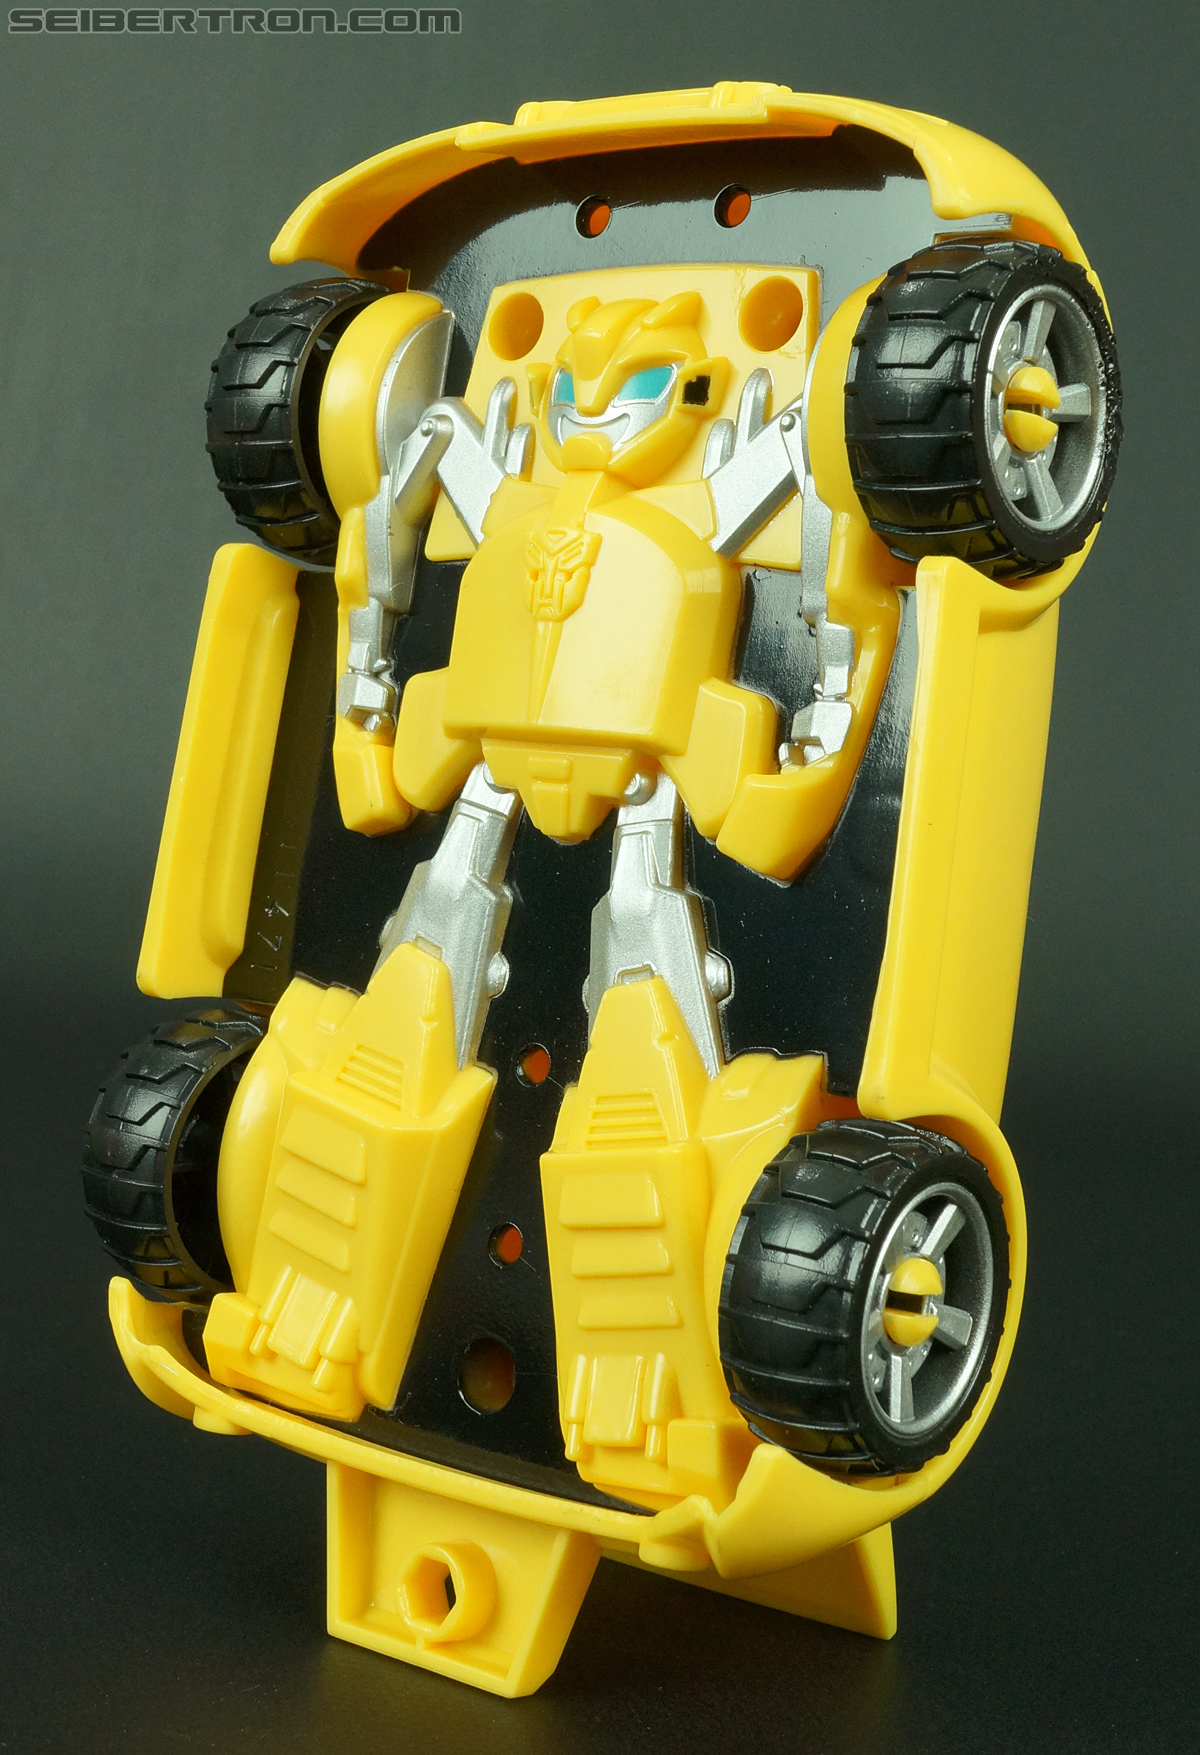 Transformers Rescue Bots Bumblebee (Bumblebee Rescue Garage) (Image #49 of 78)